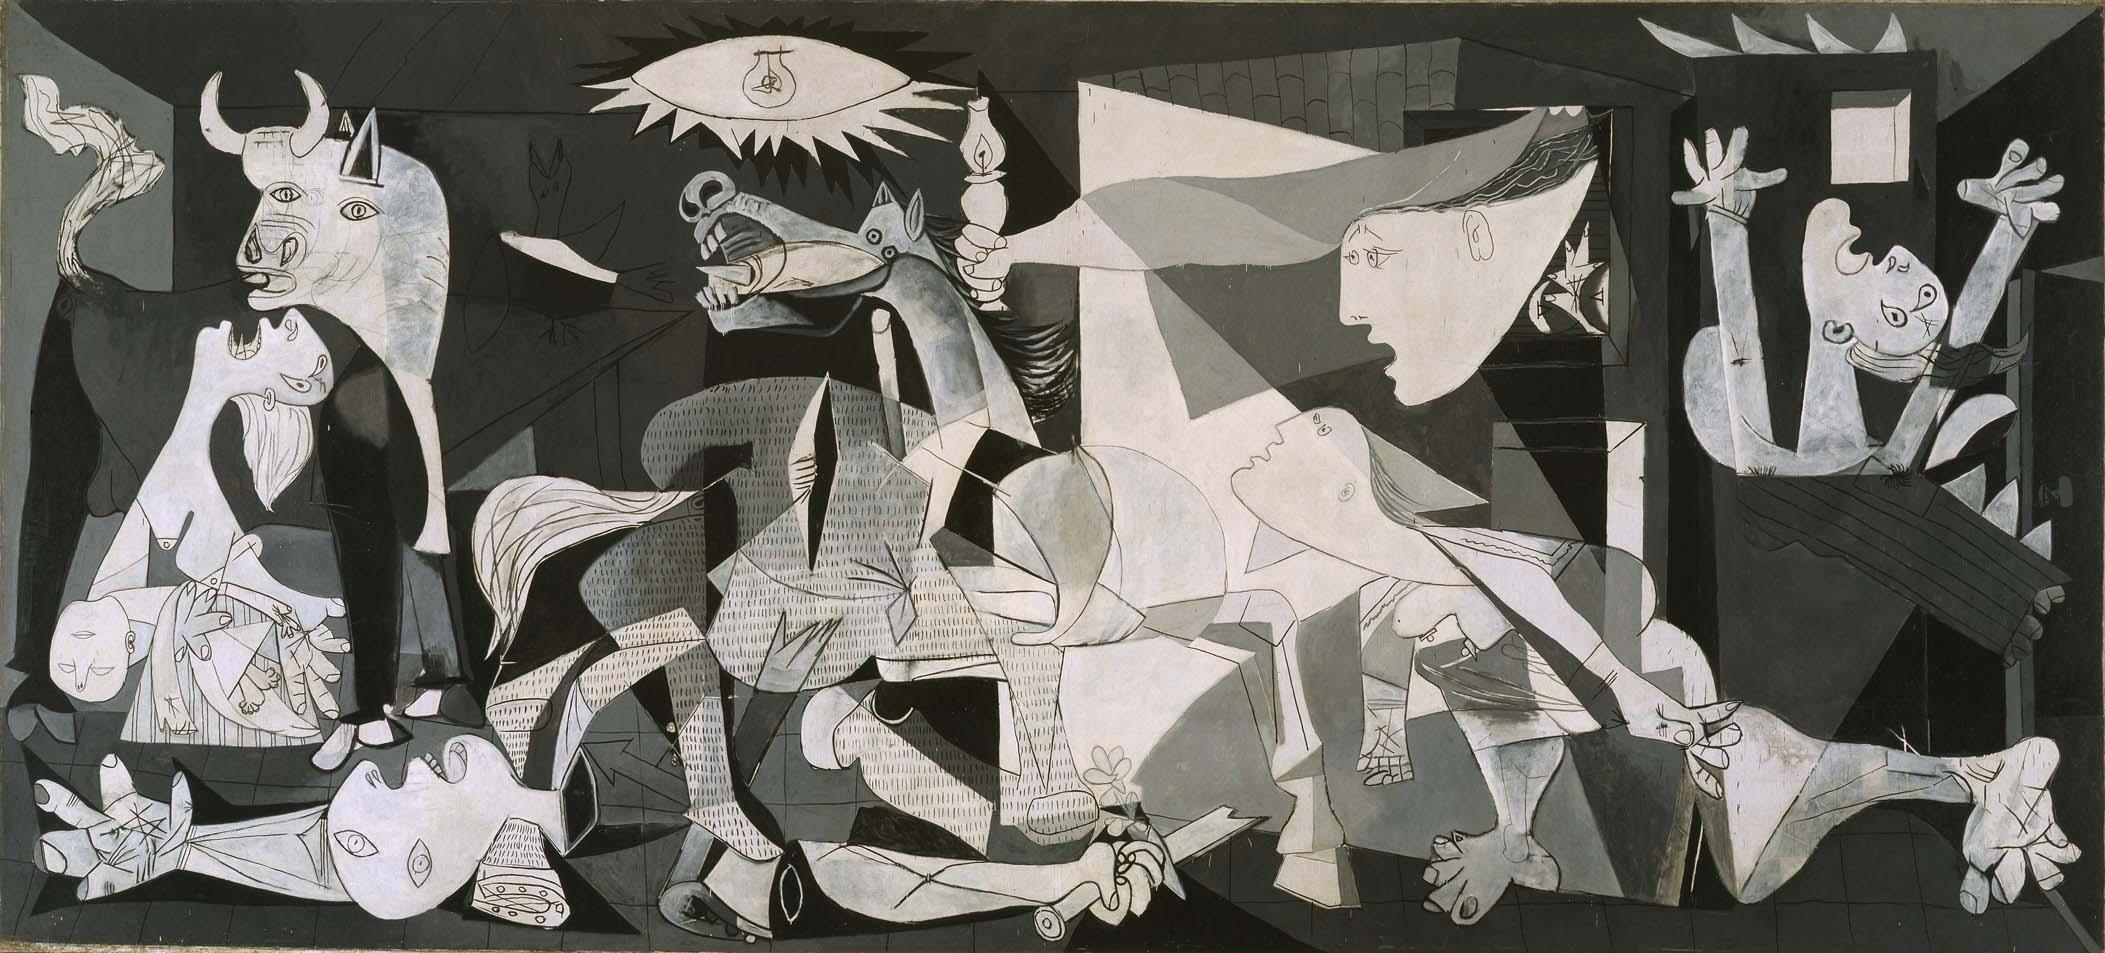 'Guernica' by Pablo Picasso